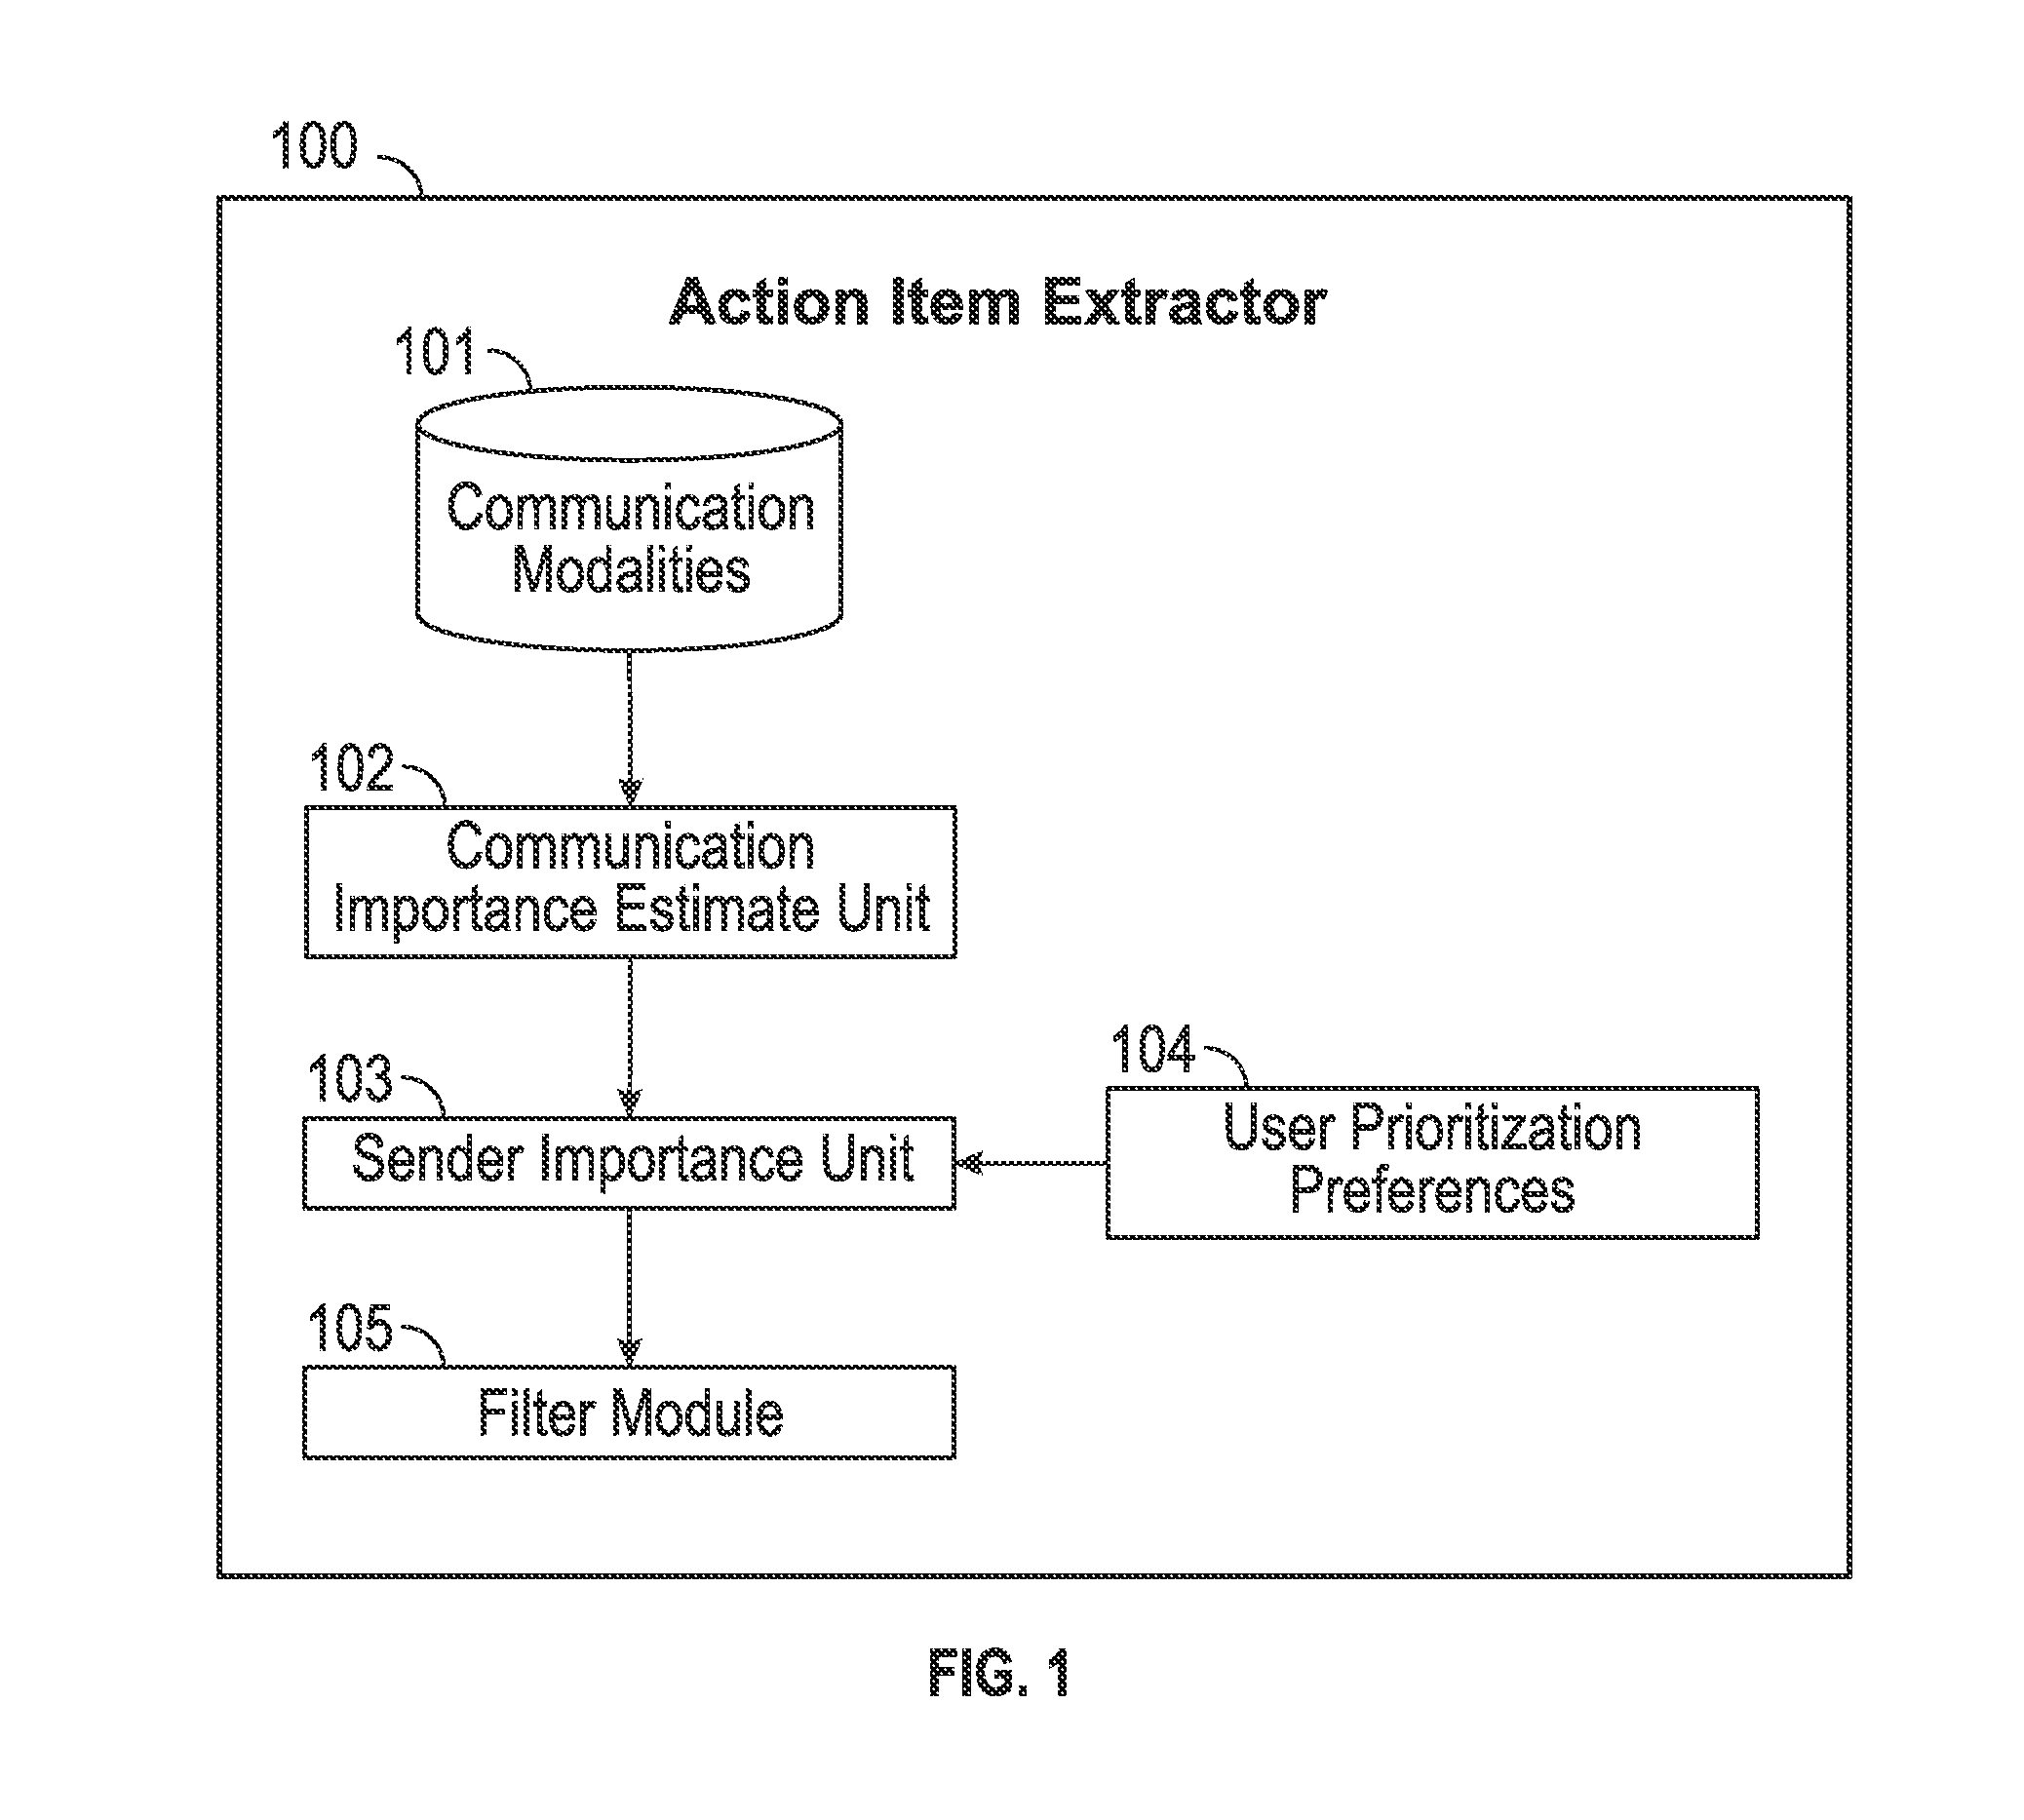 System and method for automatically mining corpus of communications and identifying messages or phrases that require the recipient's attention, response, or action